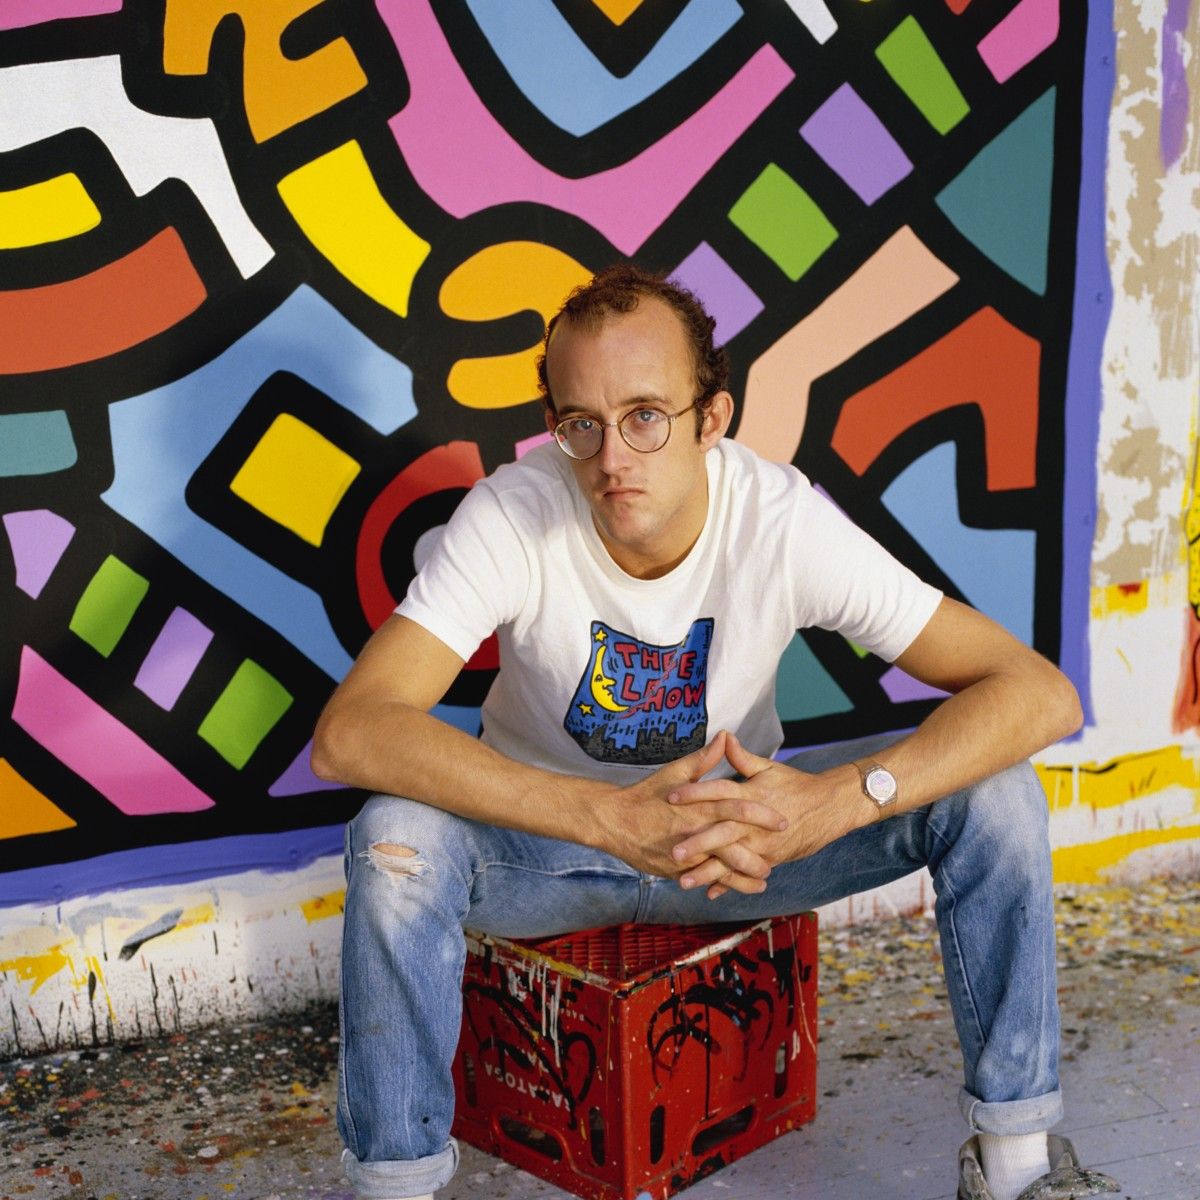 man sitting on red crate in front of a colorful painting